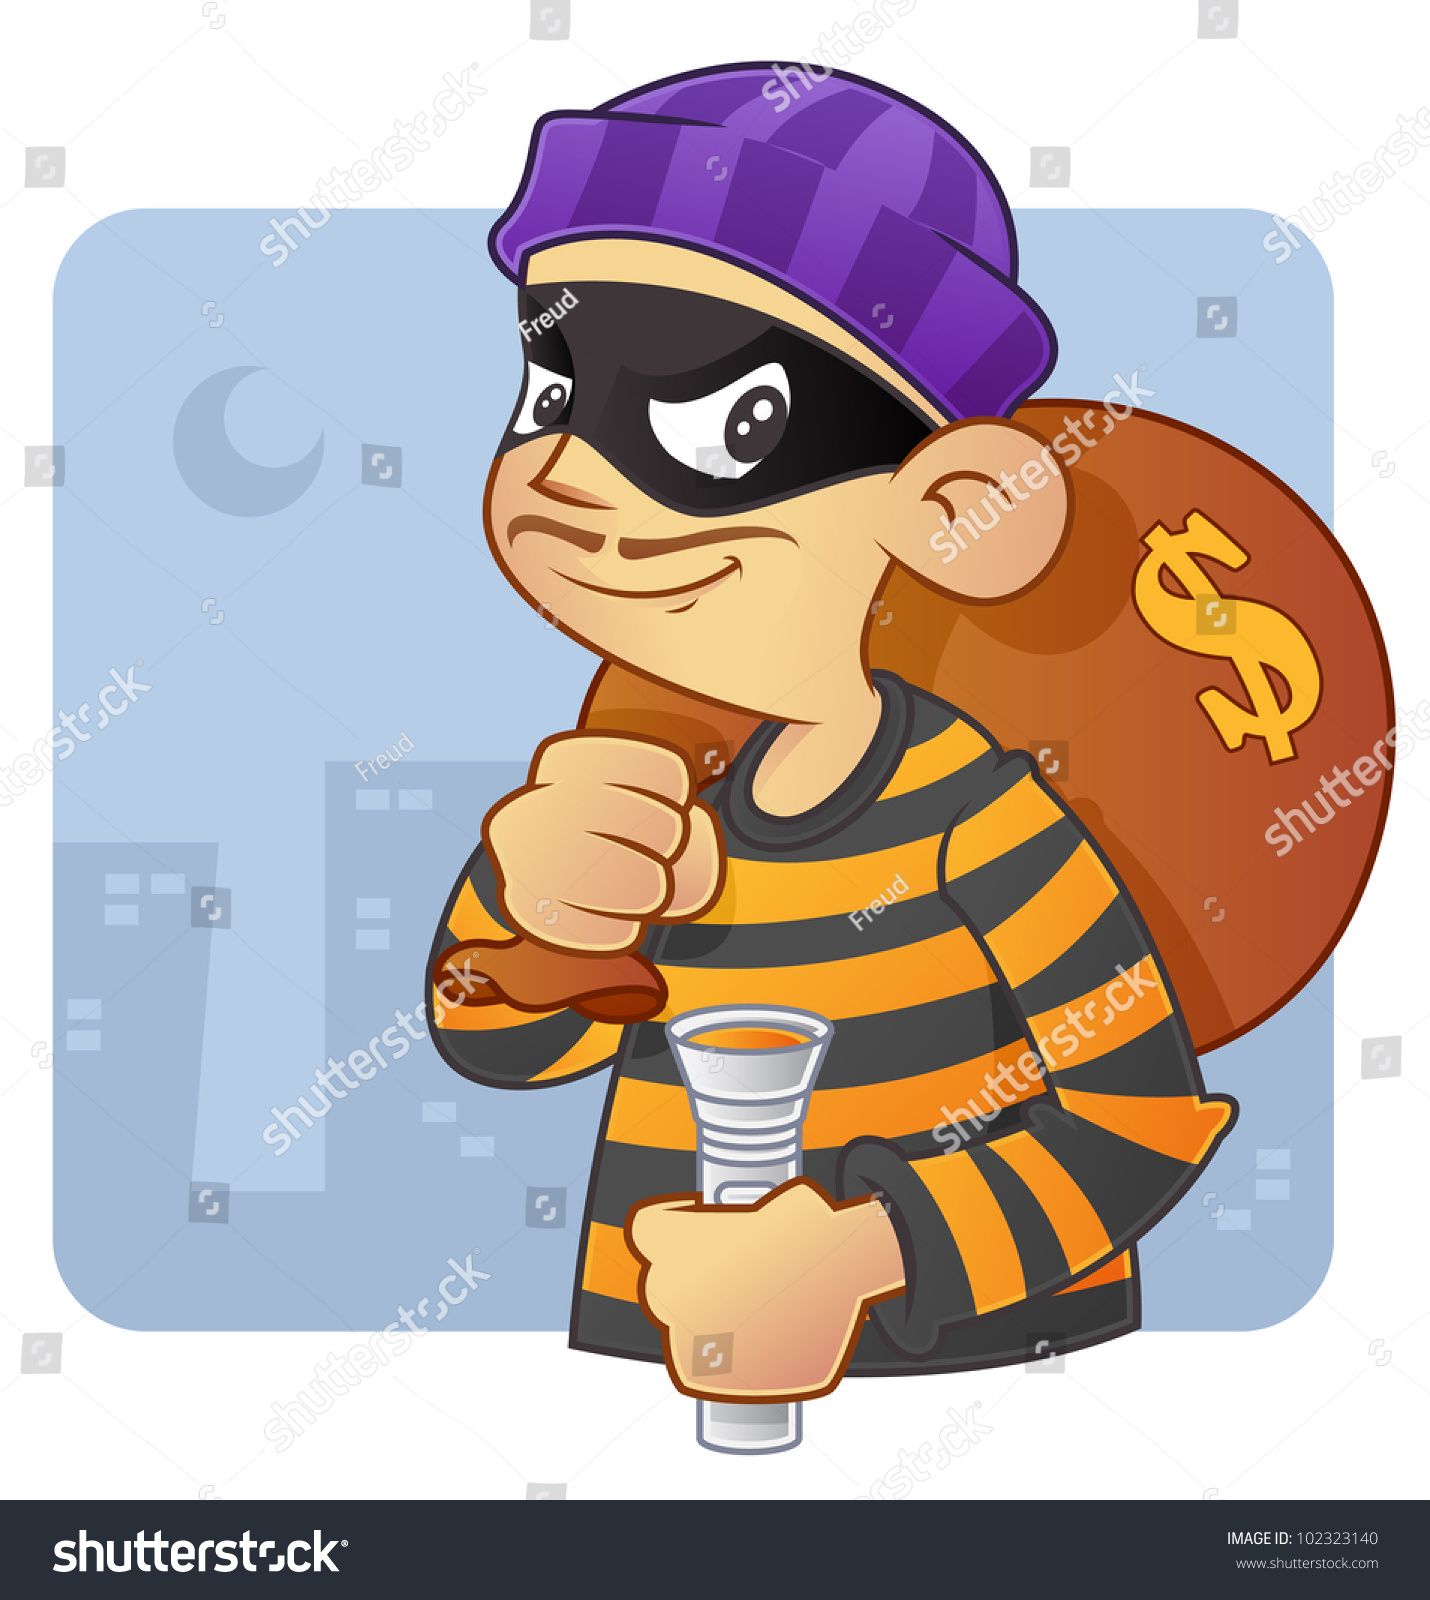 SVG of burglar cartoon character in action,  with bag of money and flash light. svg